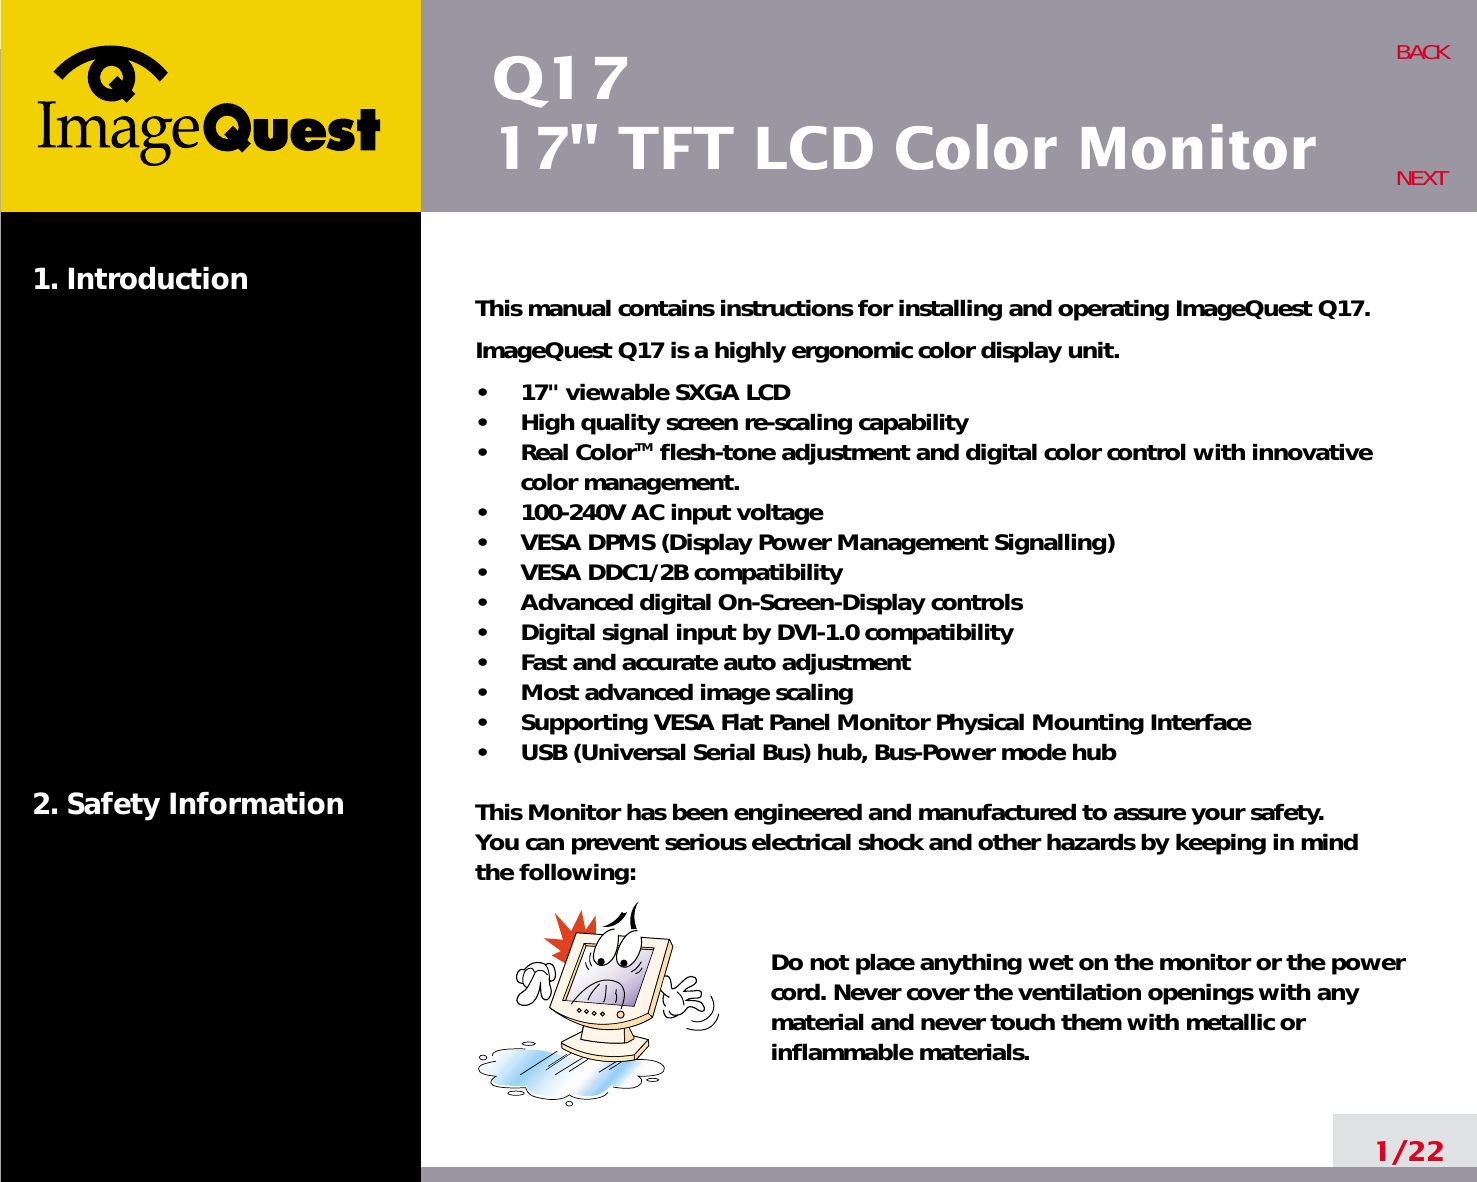 Q1717&quot; TFT LCD Color Monitor1. Introduction2. Safety Information1/22BACKNEXTThis manual contains instructions for installing and operating ImageQuest Q17.ImageQuest Q17 is a highly ergonomic color display unit.•     17&quot; viewable SXGA LCD•     High quality screen re-scaling capability•     Real ColorTM flesh-tone adjustment and digital color control with innovativecolor management.•     100-240V AC input voltage•     VESA DPMS (Display Power Management Signalling)•     VESA DDC1/2B compatibility•     Advanced digital On-Screen-Display controls•     Digital signal input by DVI-1.0 compatibility  •     Fast and accurate auto adjustment  •     Most advanced image scaling•     Supporting VESA Flat Panel Monitor Physical Mounting Interface•     USB (Universal Serial Bus) hub, Bus-Power mode hubThis Monitor has been engineered and manufactured to assure your safety. You can prevent serious electrical shock and other hazards by keeping in mind the following:Do not place anything wet on the monitor or the powercord. Never cover the ventilation openings with anymaterial and never touch them with metallic or inflammable materials.